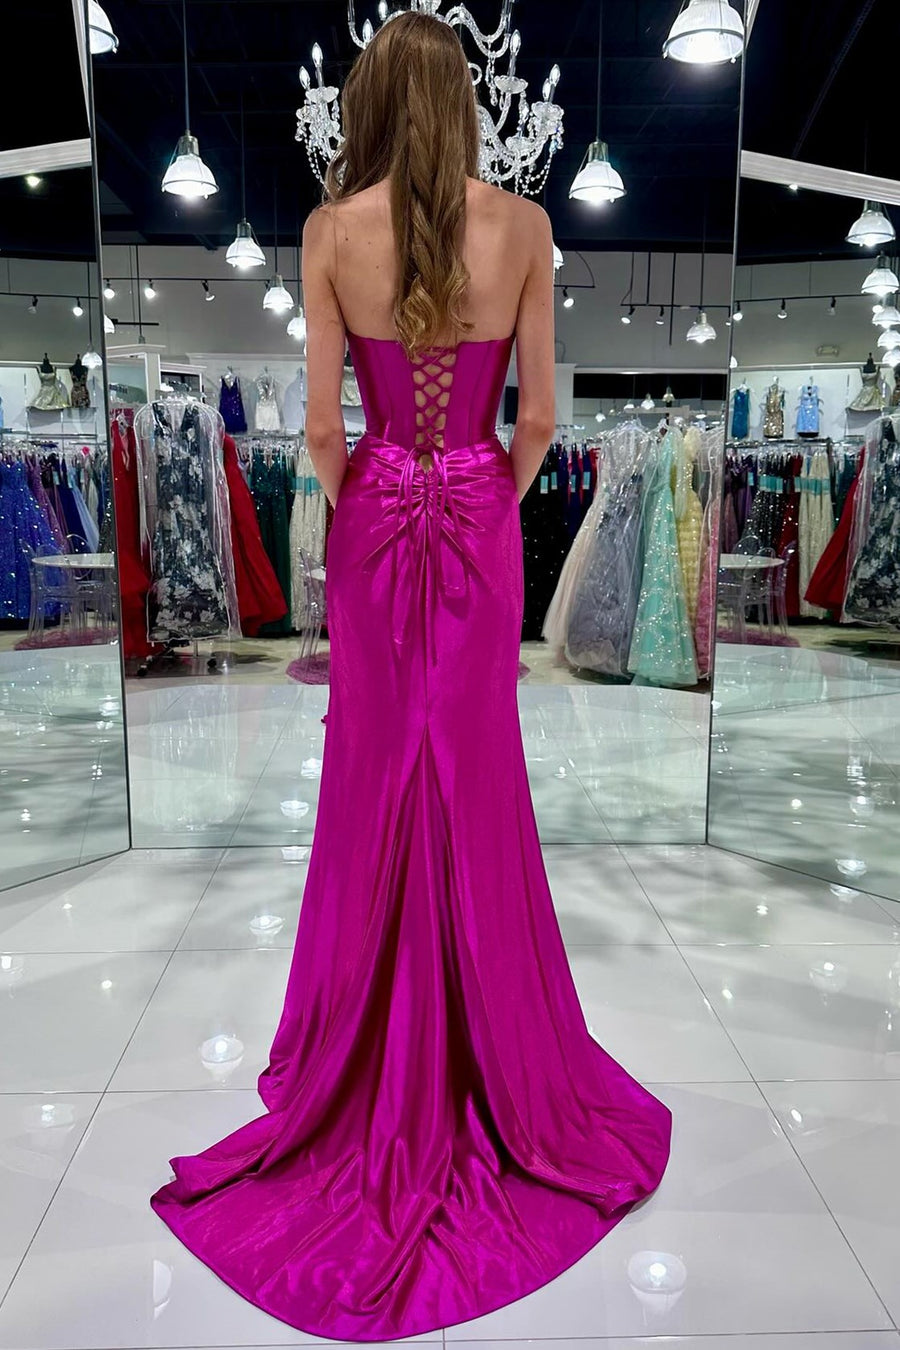 Red Strapless Twist-Front Mermaid Long Dress with Slit